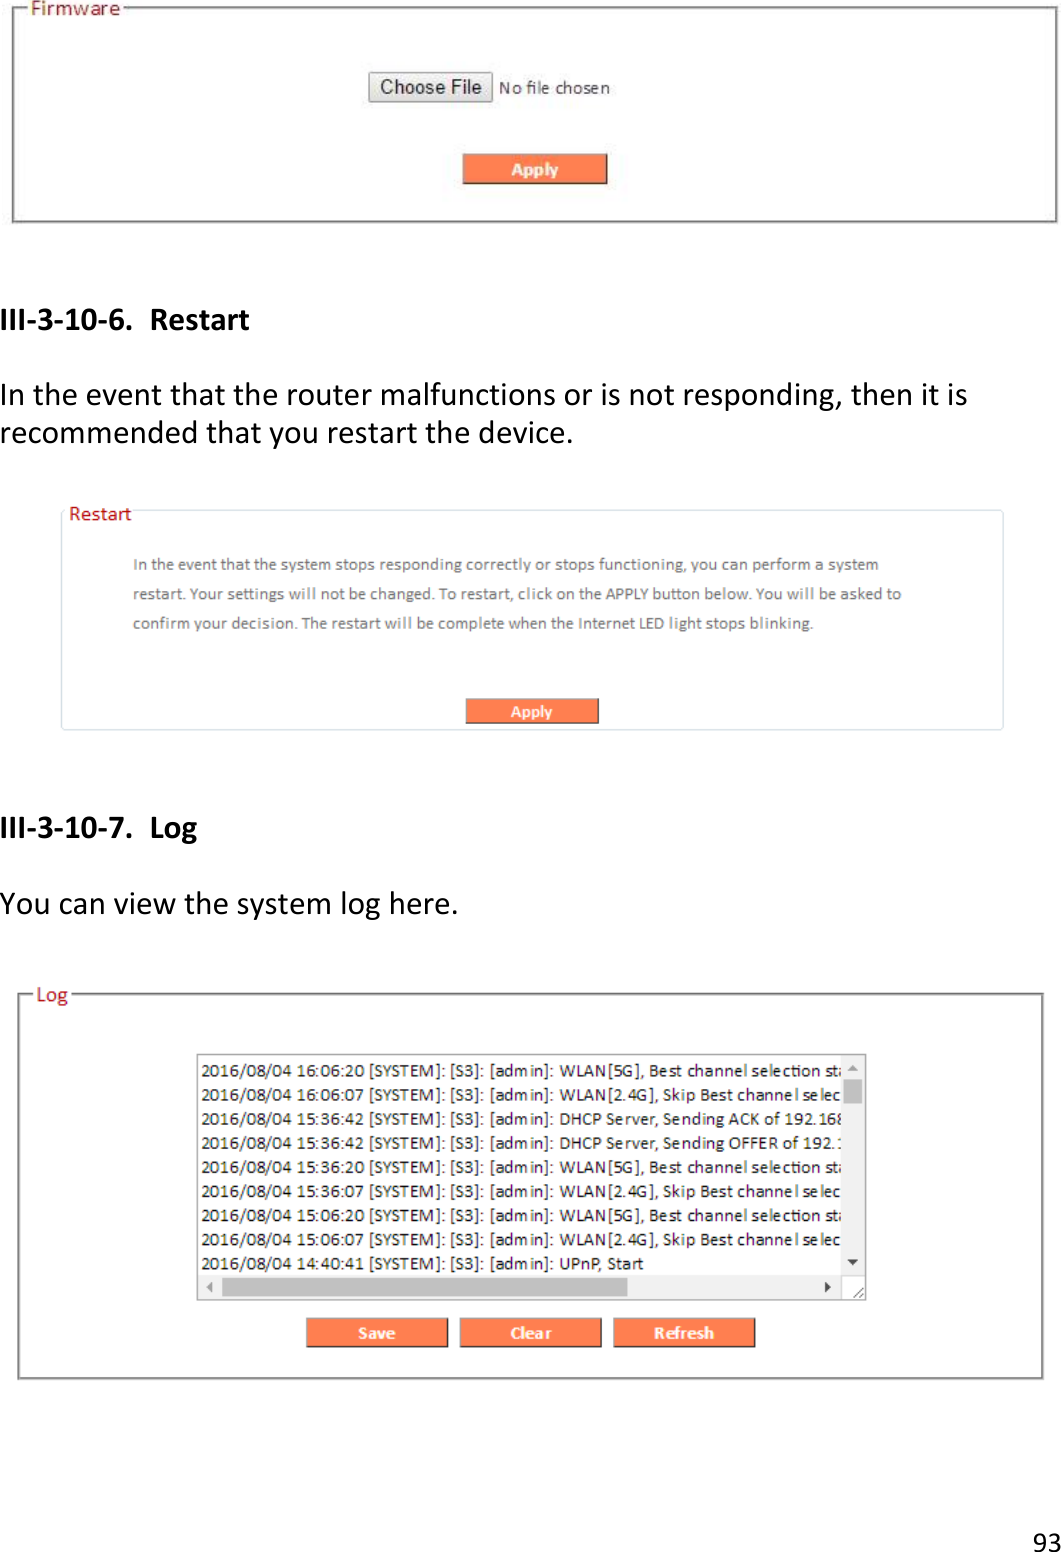 93    III-3-10-6.  Restart  In the event that the router malfunctions or is not responding, then it is recommended that you restart the device.    III-3-10-7.  Log  You can view the system log here.           